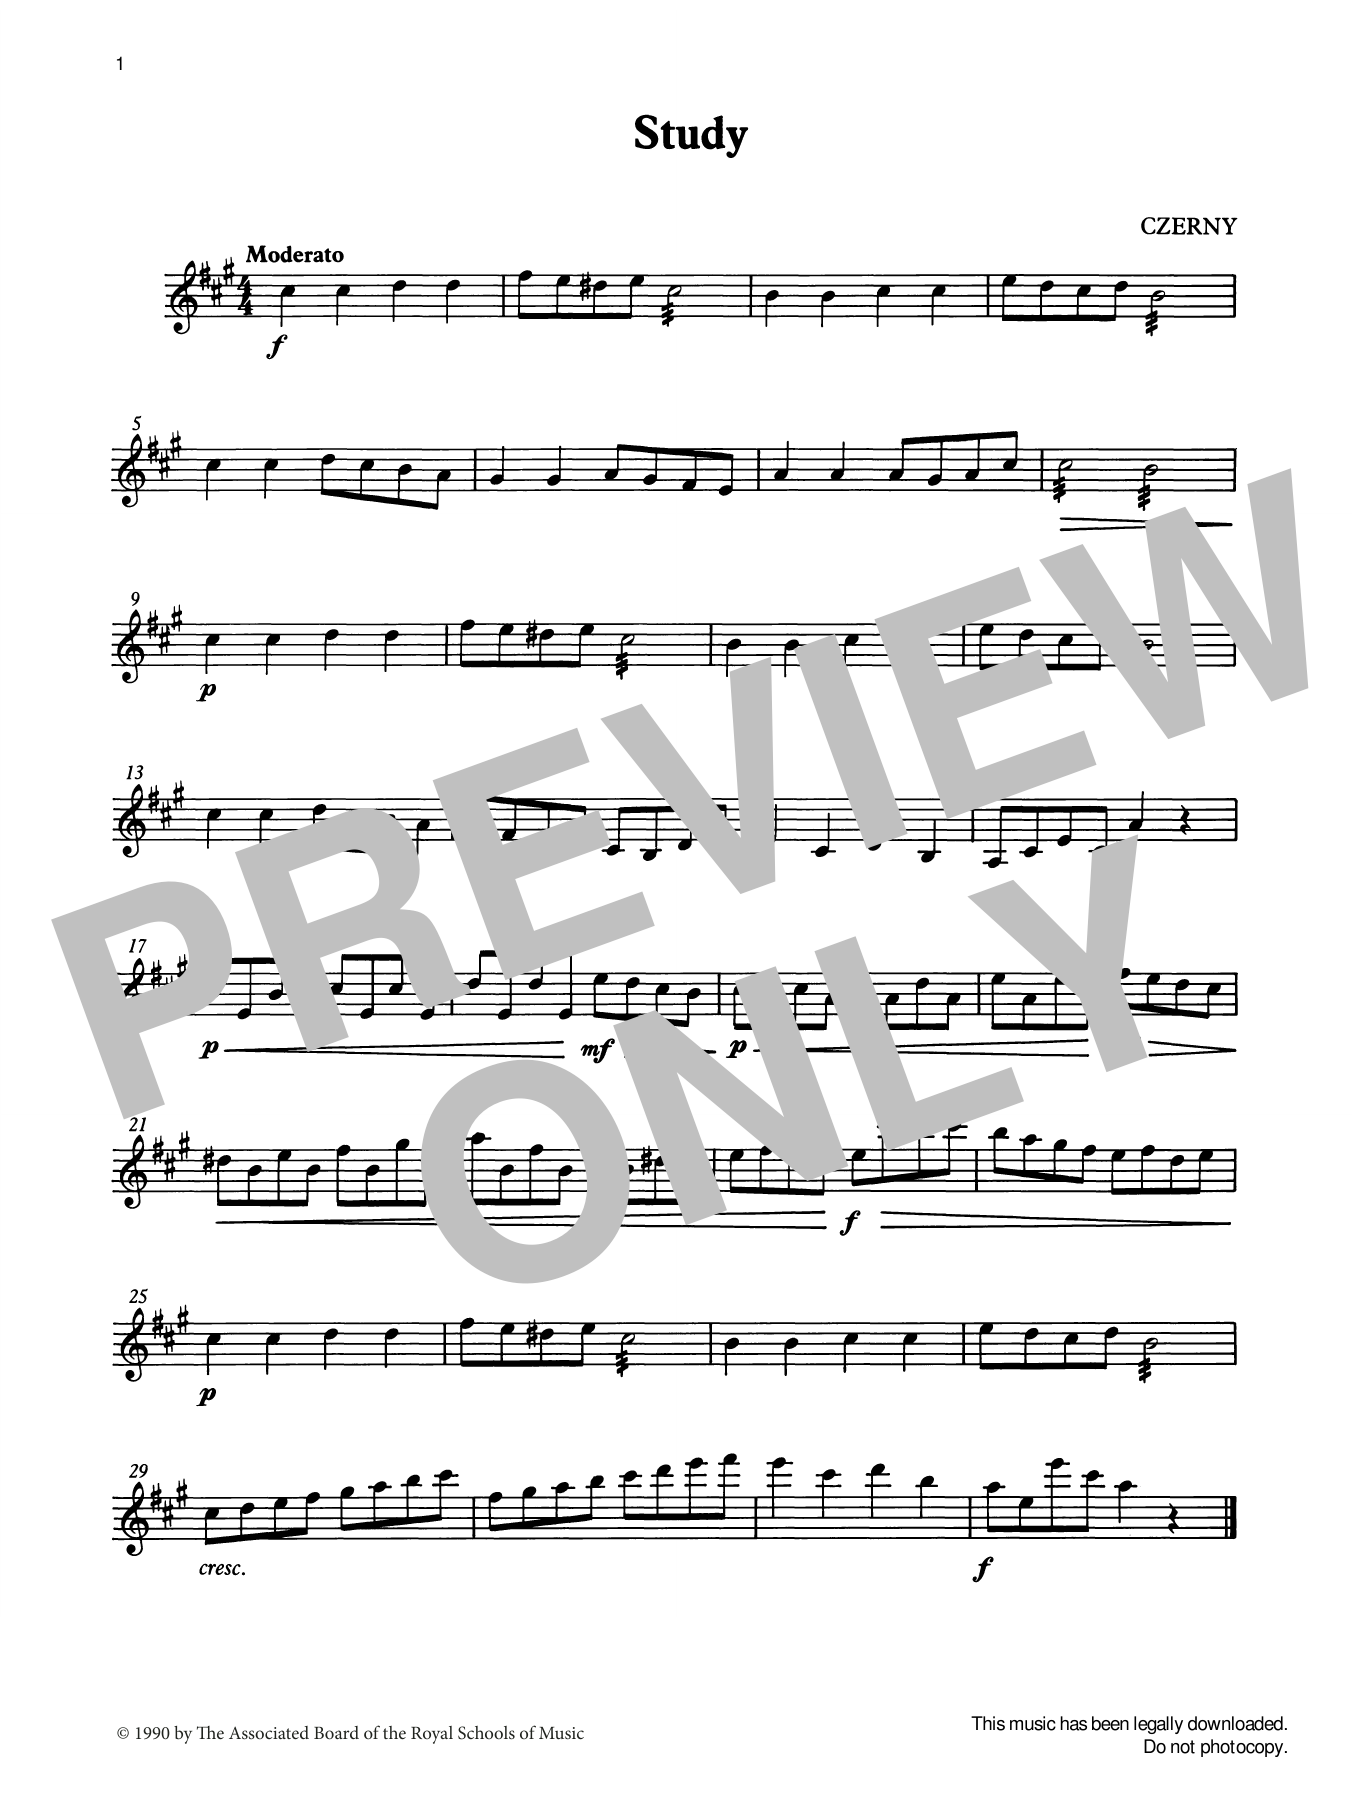 Download Carl Czerny Study from Graded Music for Tuned Percu Sheet Music